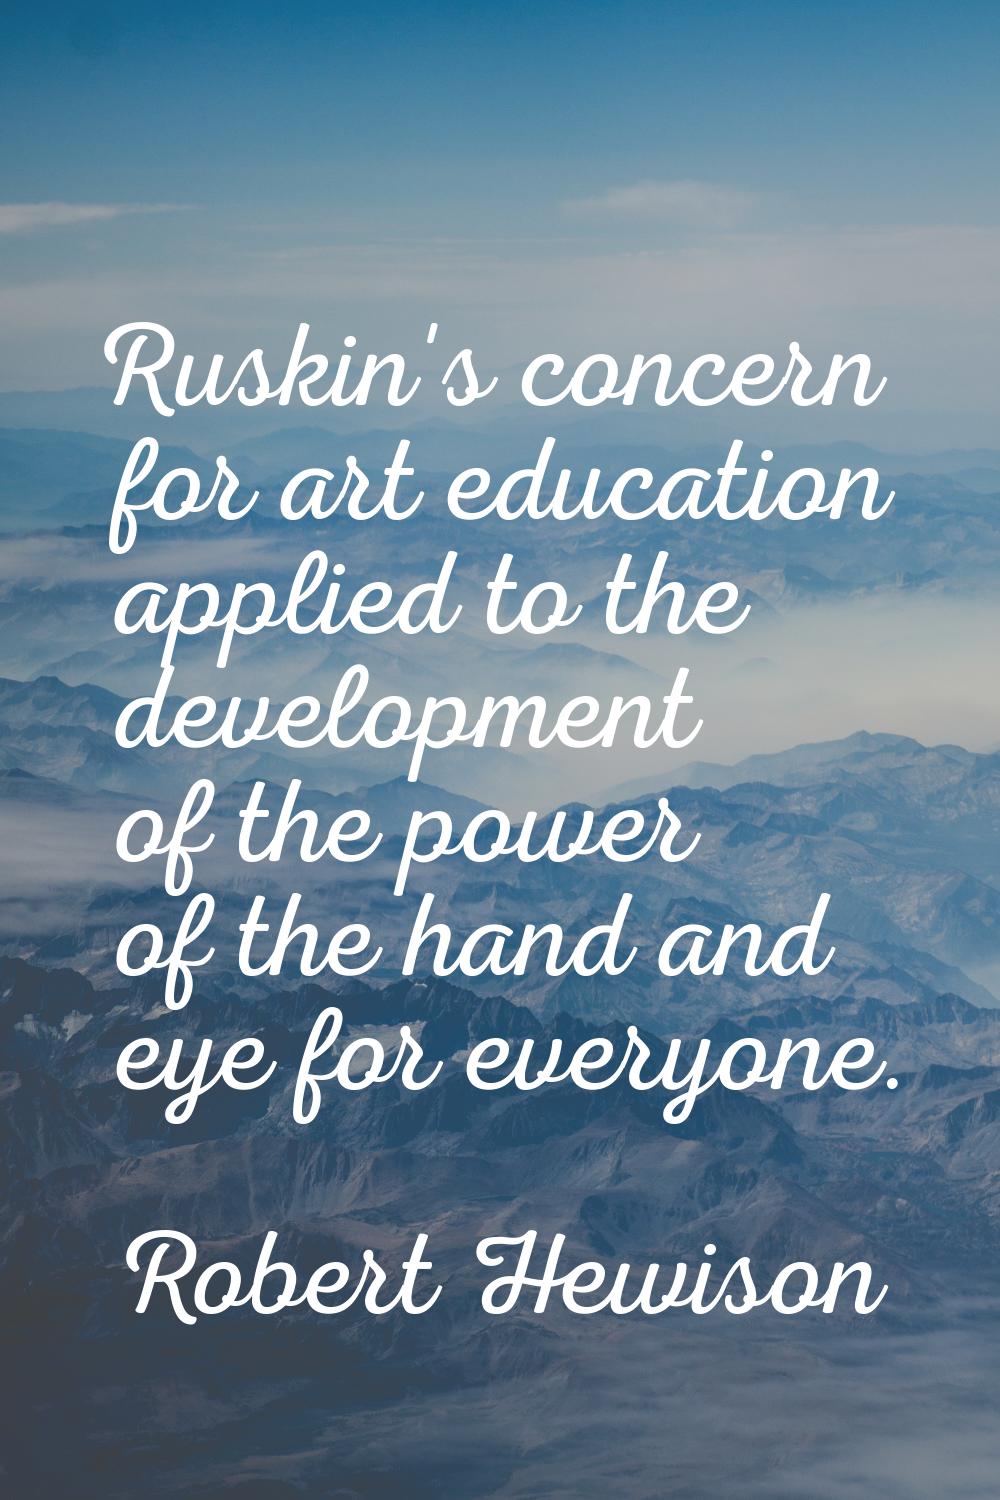 Ruskin's concern for art education applied to the development of the power of the hand and eye for 